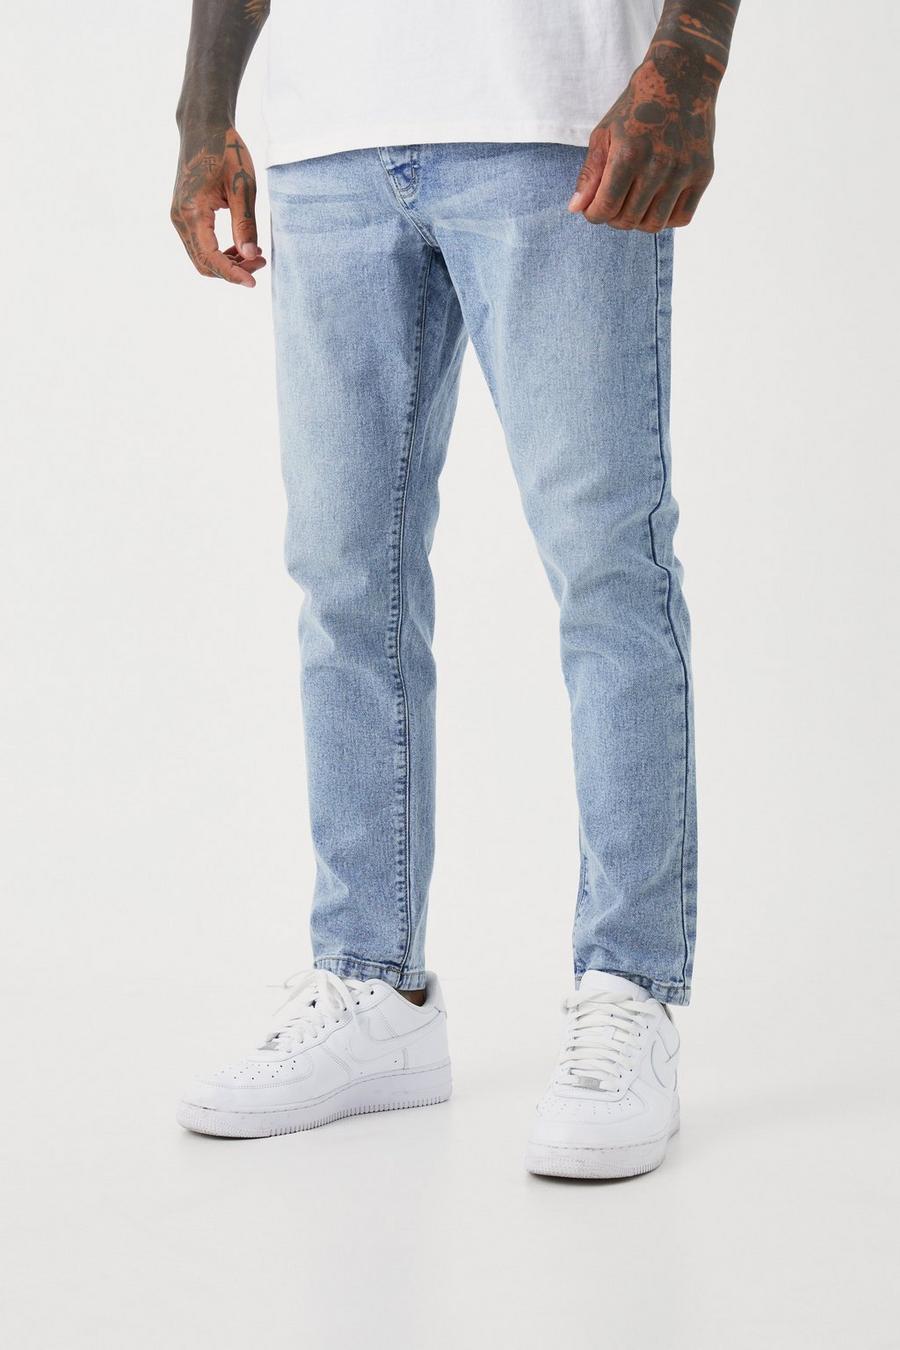 What Are Tapered Jeans?